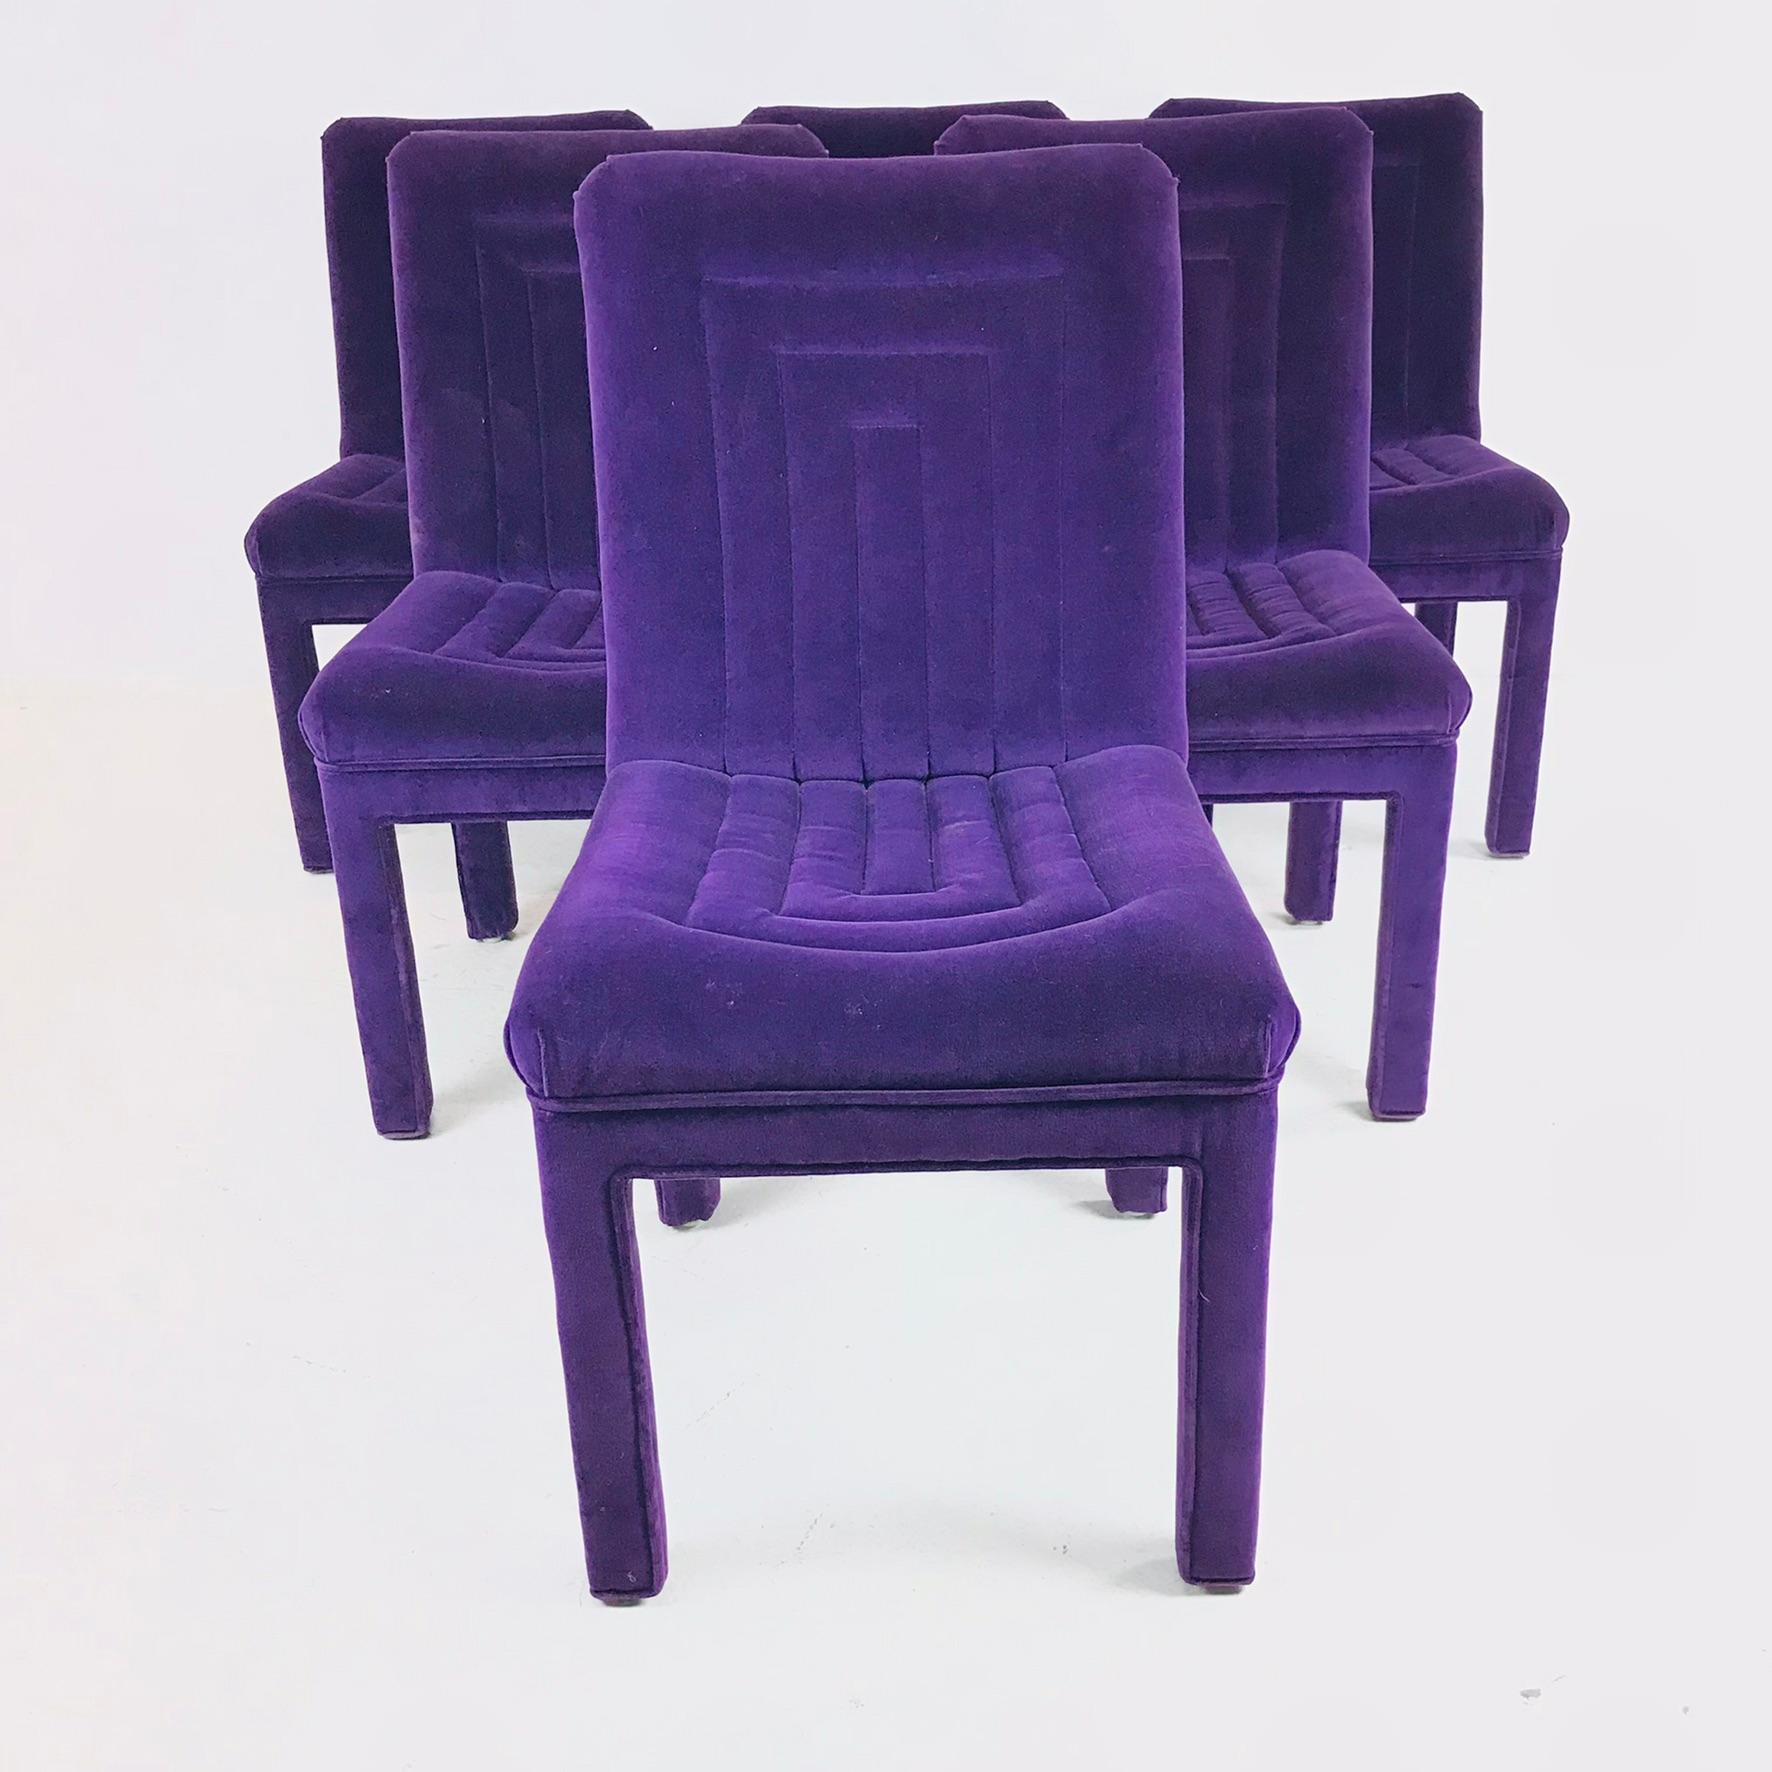 Super groovy set of 6 vintage Parsons chairs by John Widdicomb. Beautiful purple upholstery is in great condition and chairs are very sturdy.